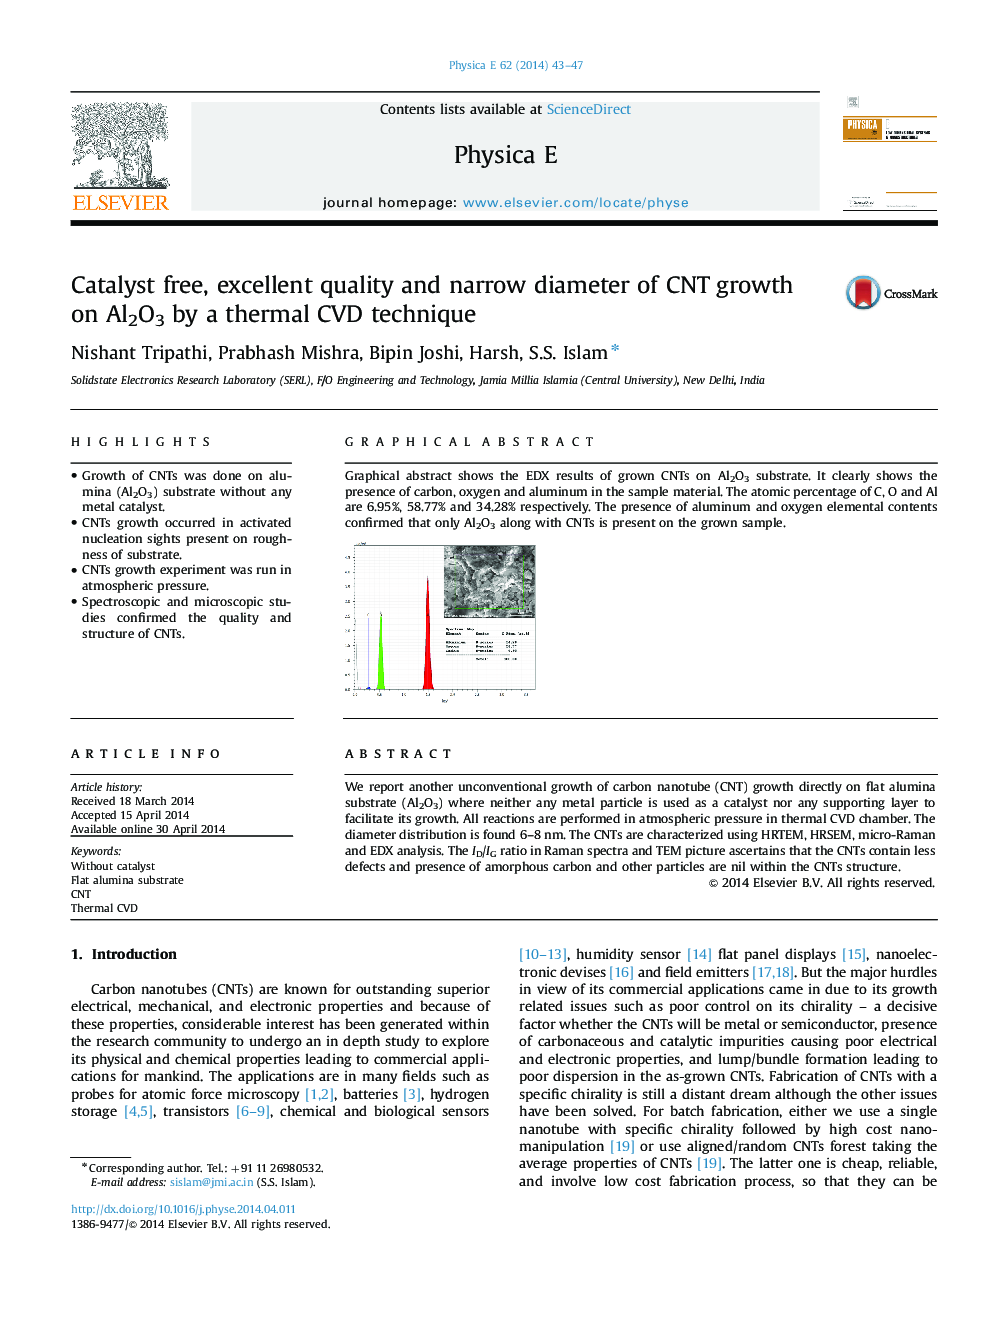 Catalyst free, excellent quality and narrow diameter of CNT growth on Al2O3 by a thermal CVD technique